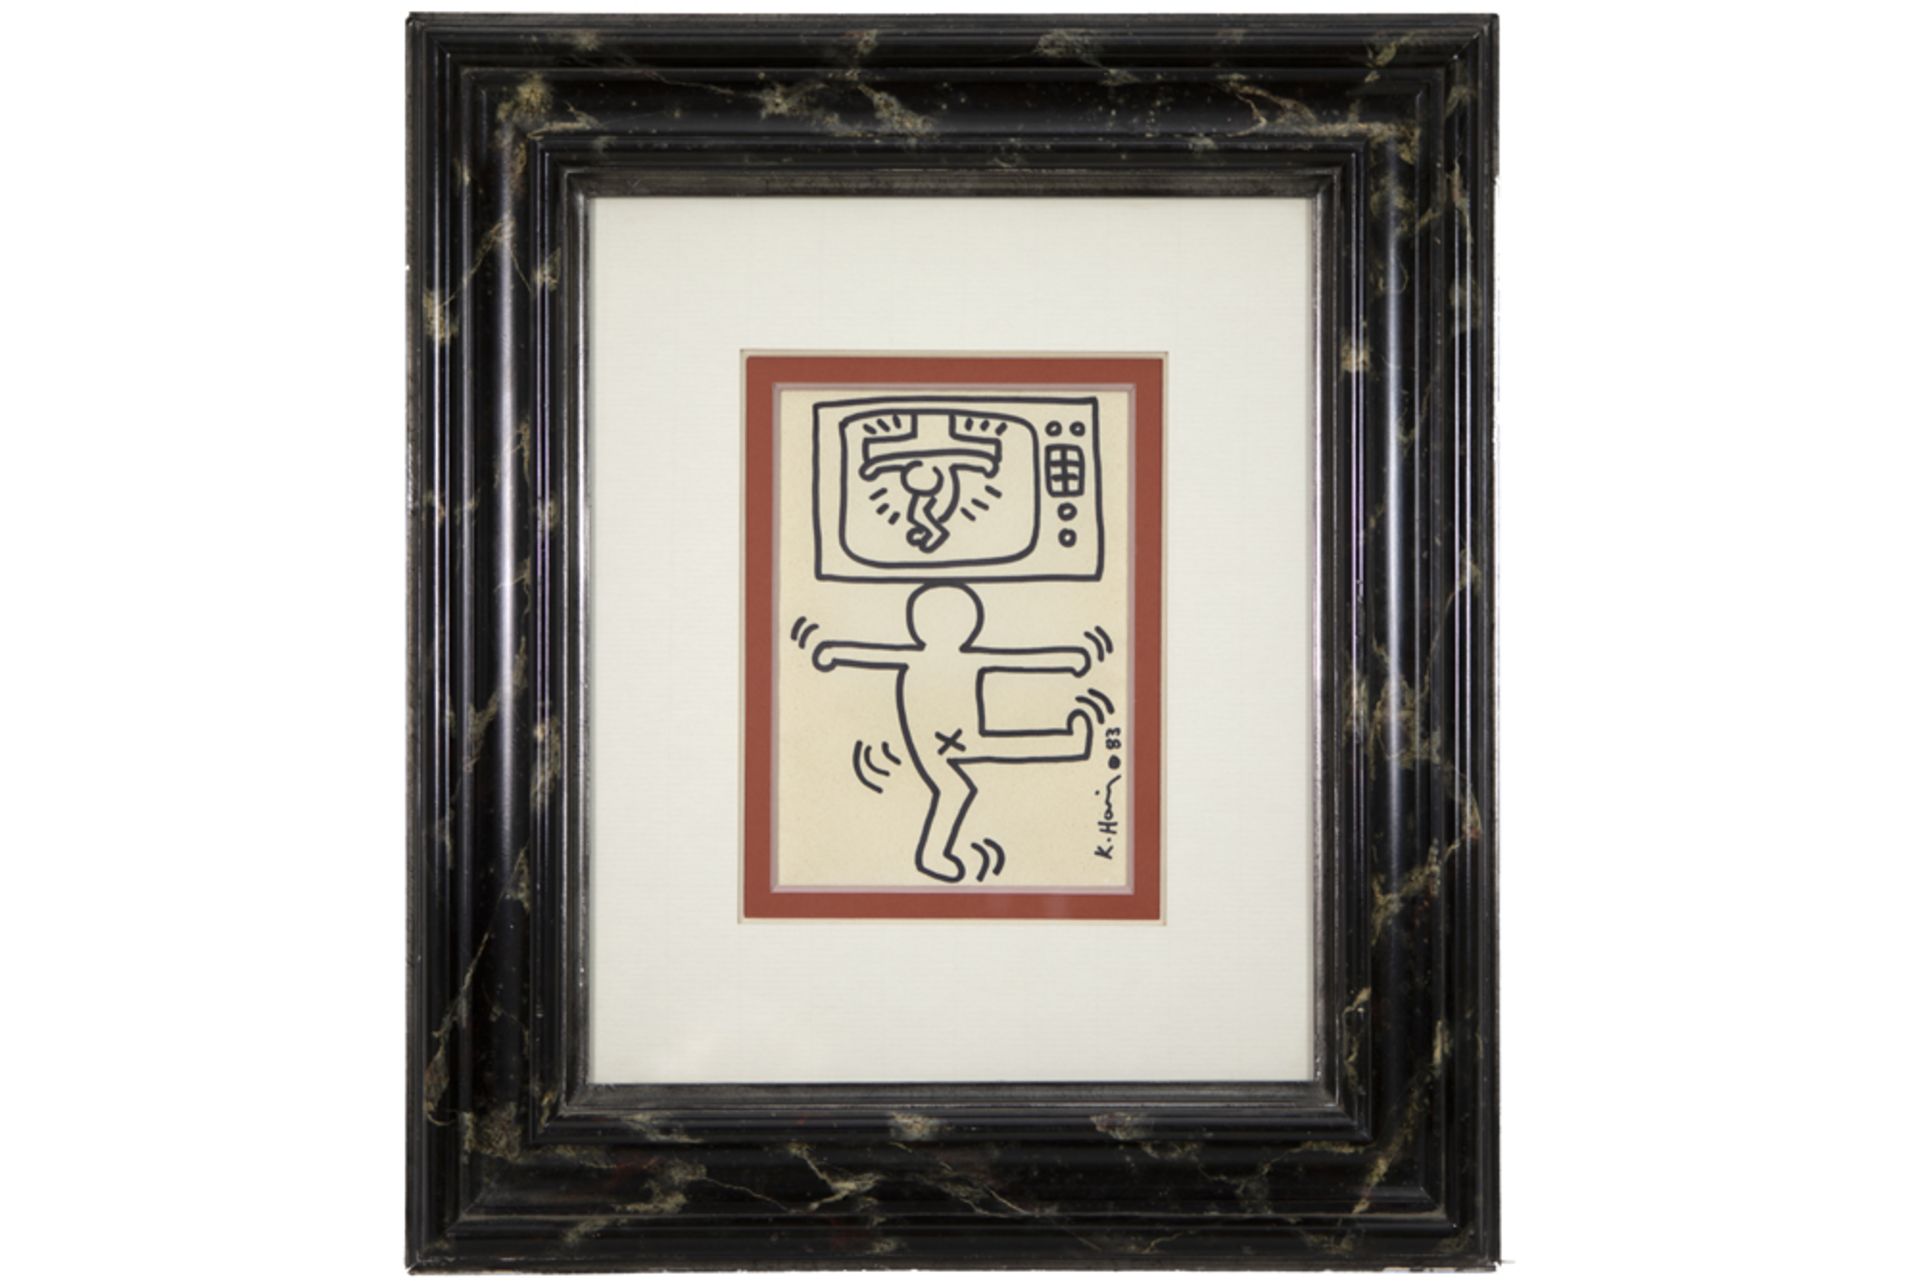 Keith Haring signed and (19)83 dated marker drawing with an authentication stamp of the Foundation - Image 3 of 3